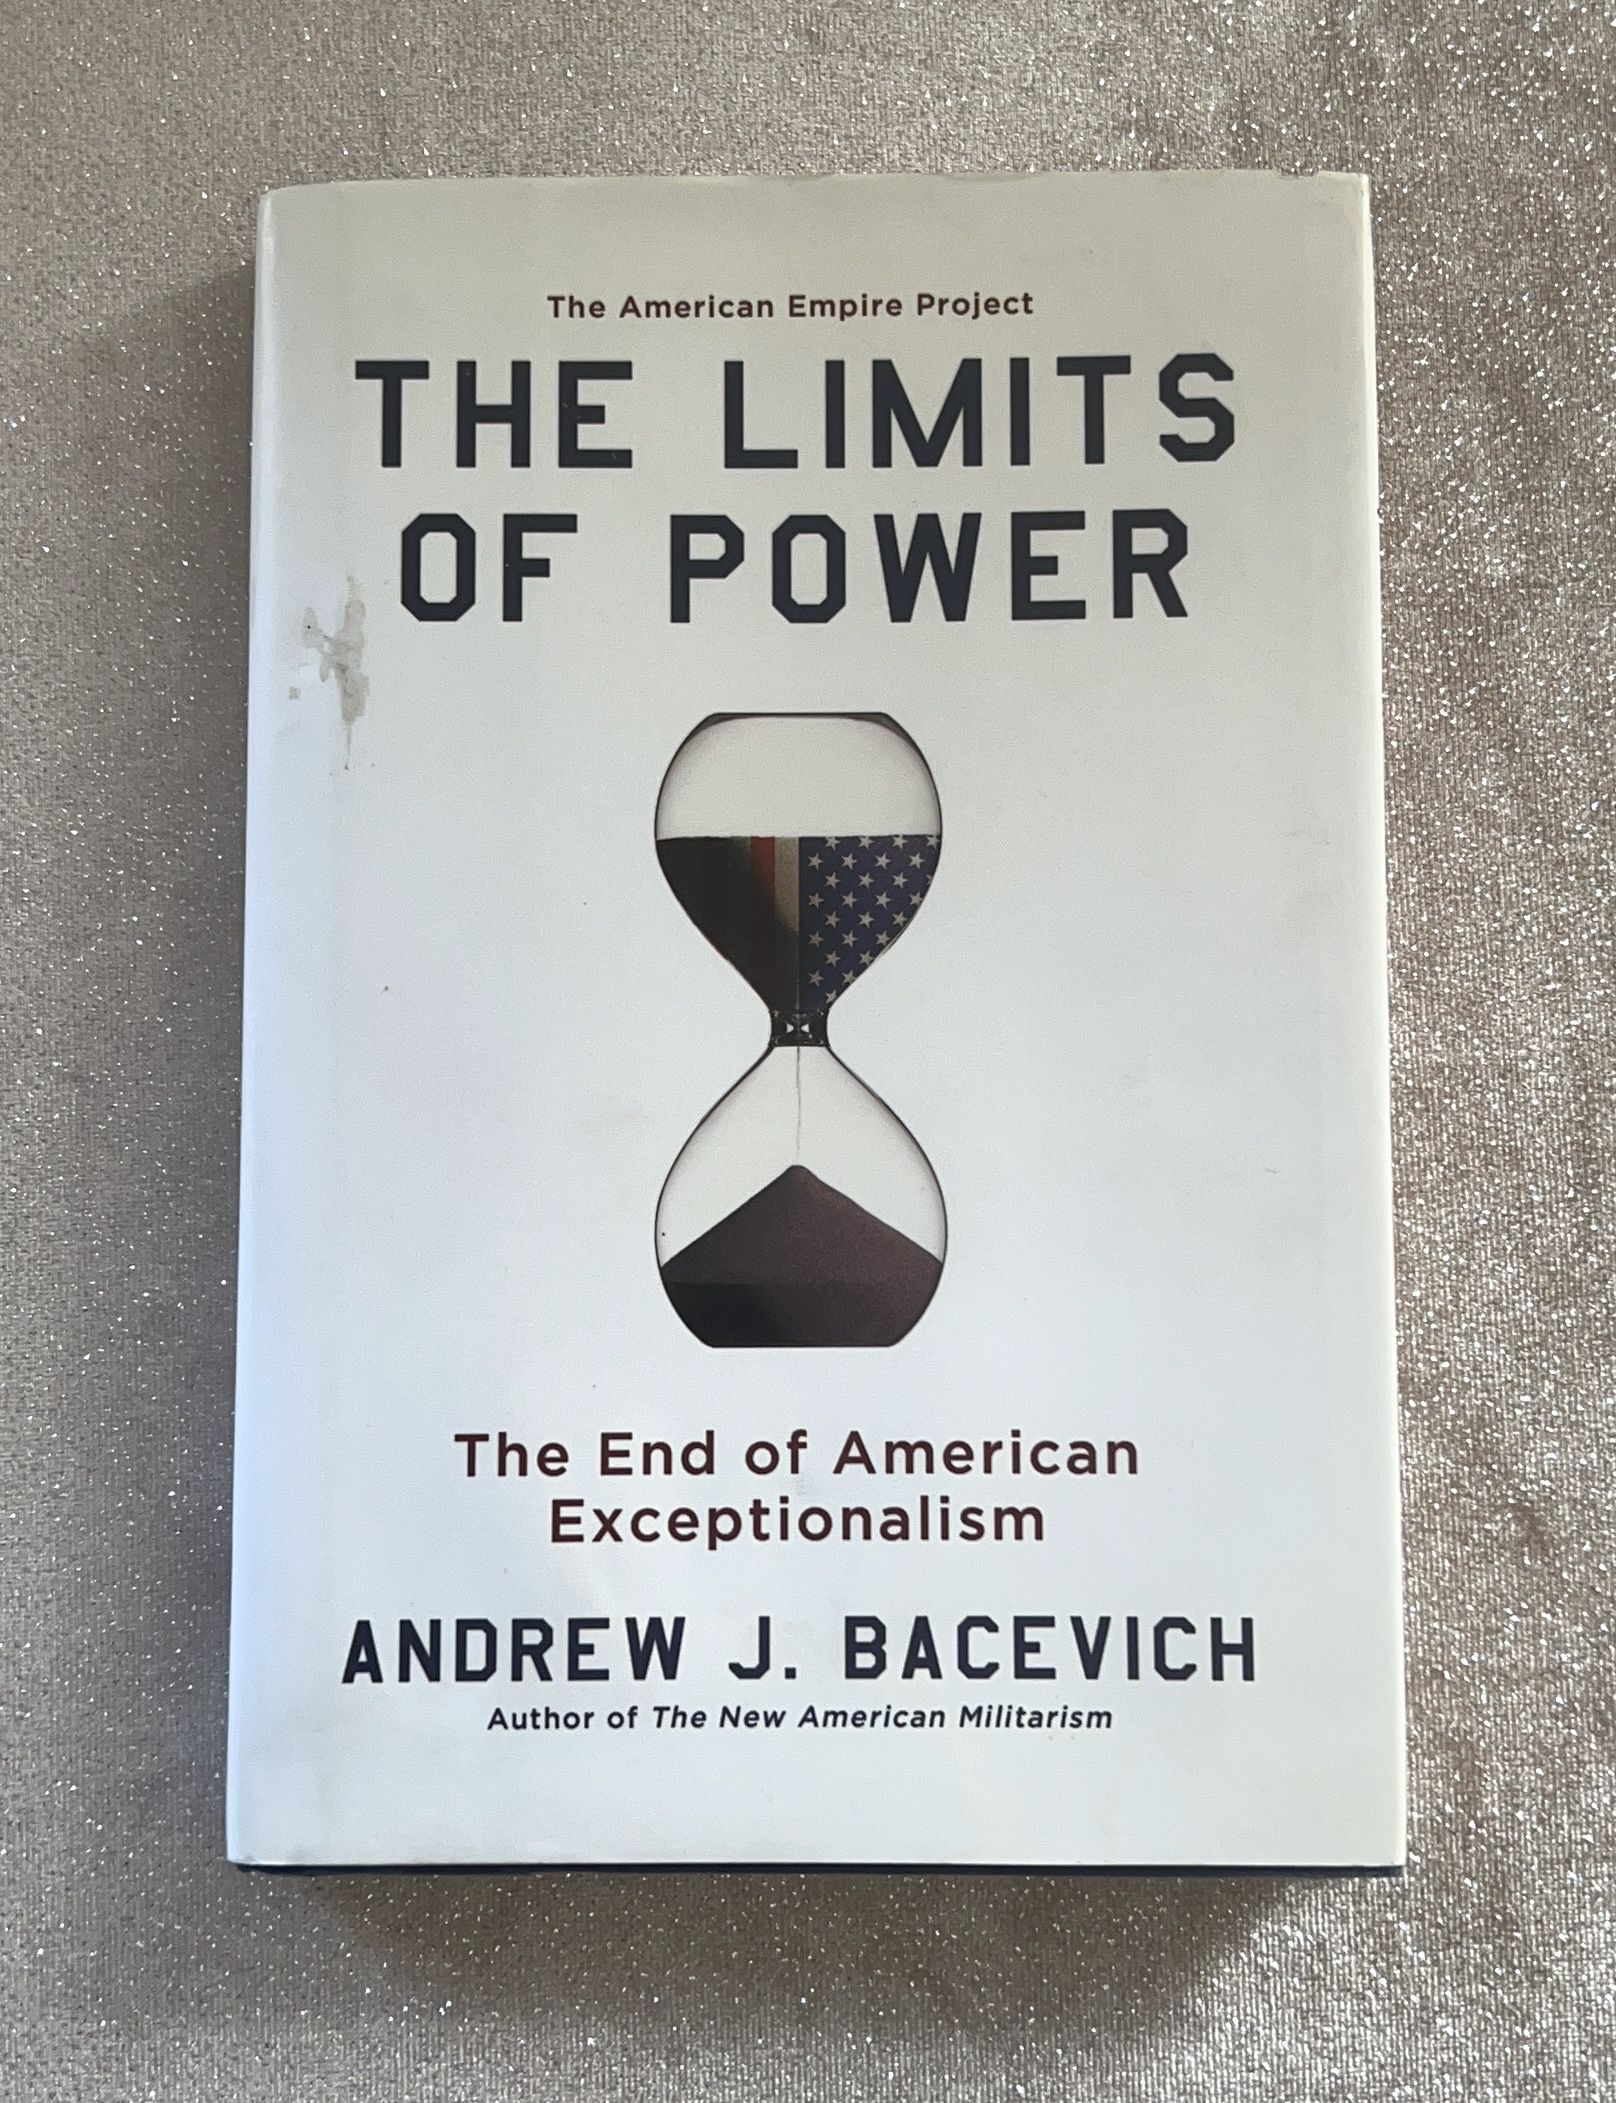 The Limits of Power by Andrew J. Bacevich